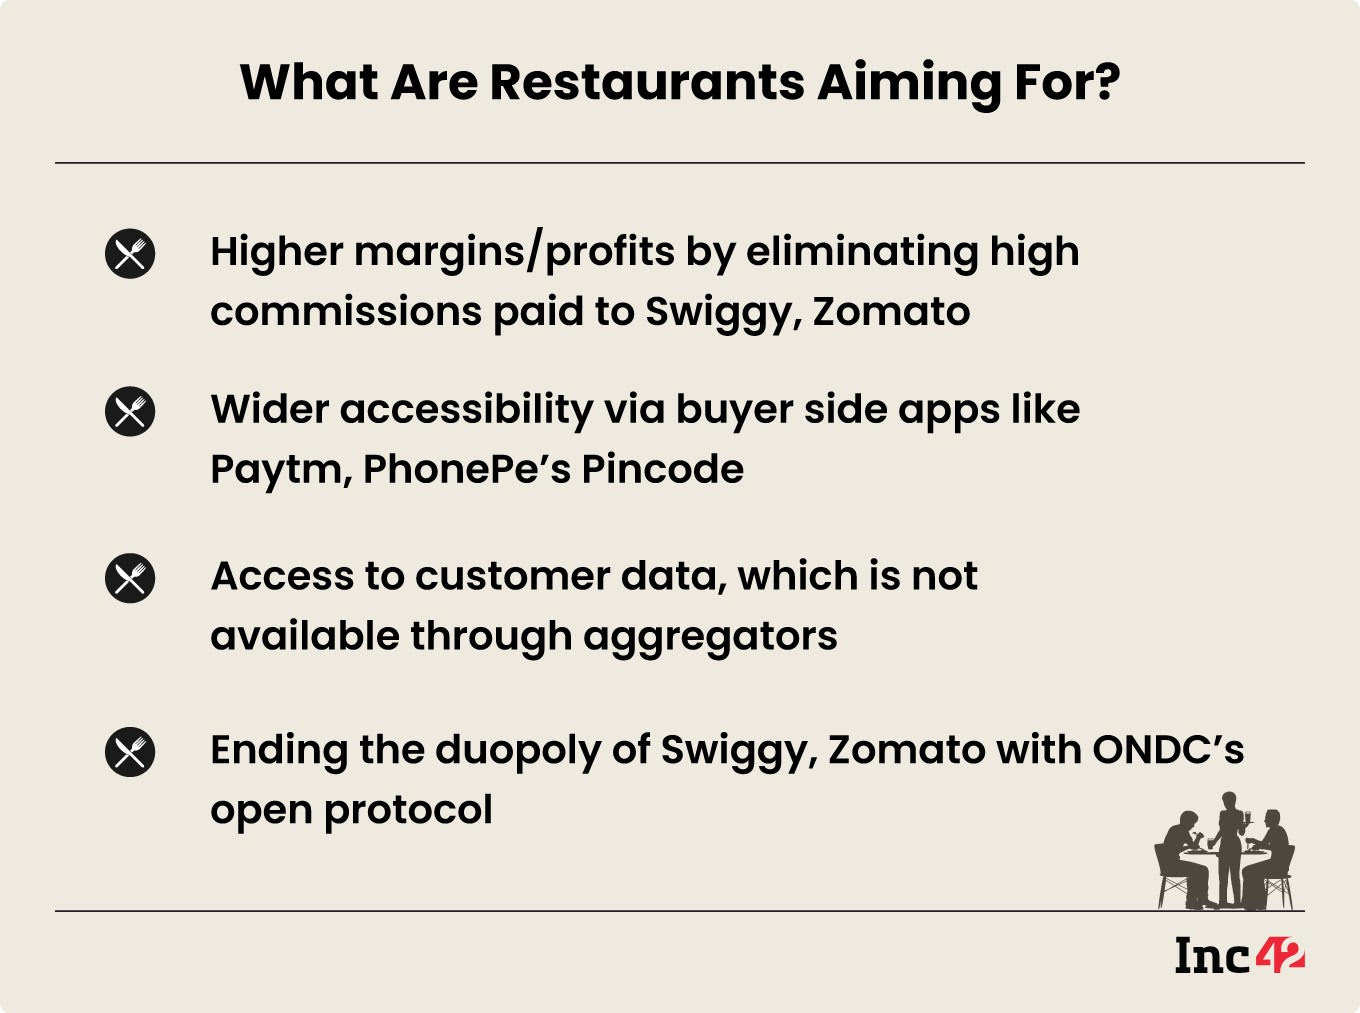 What are restaurants aiming for